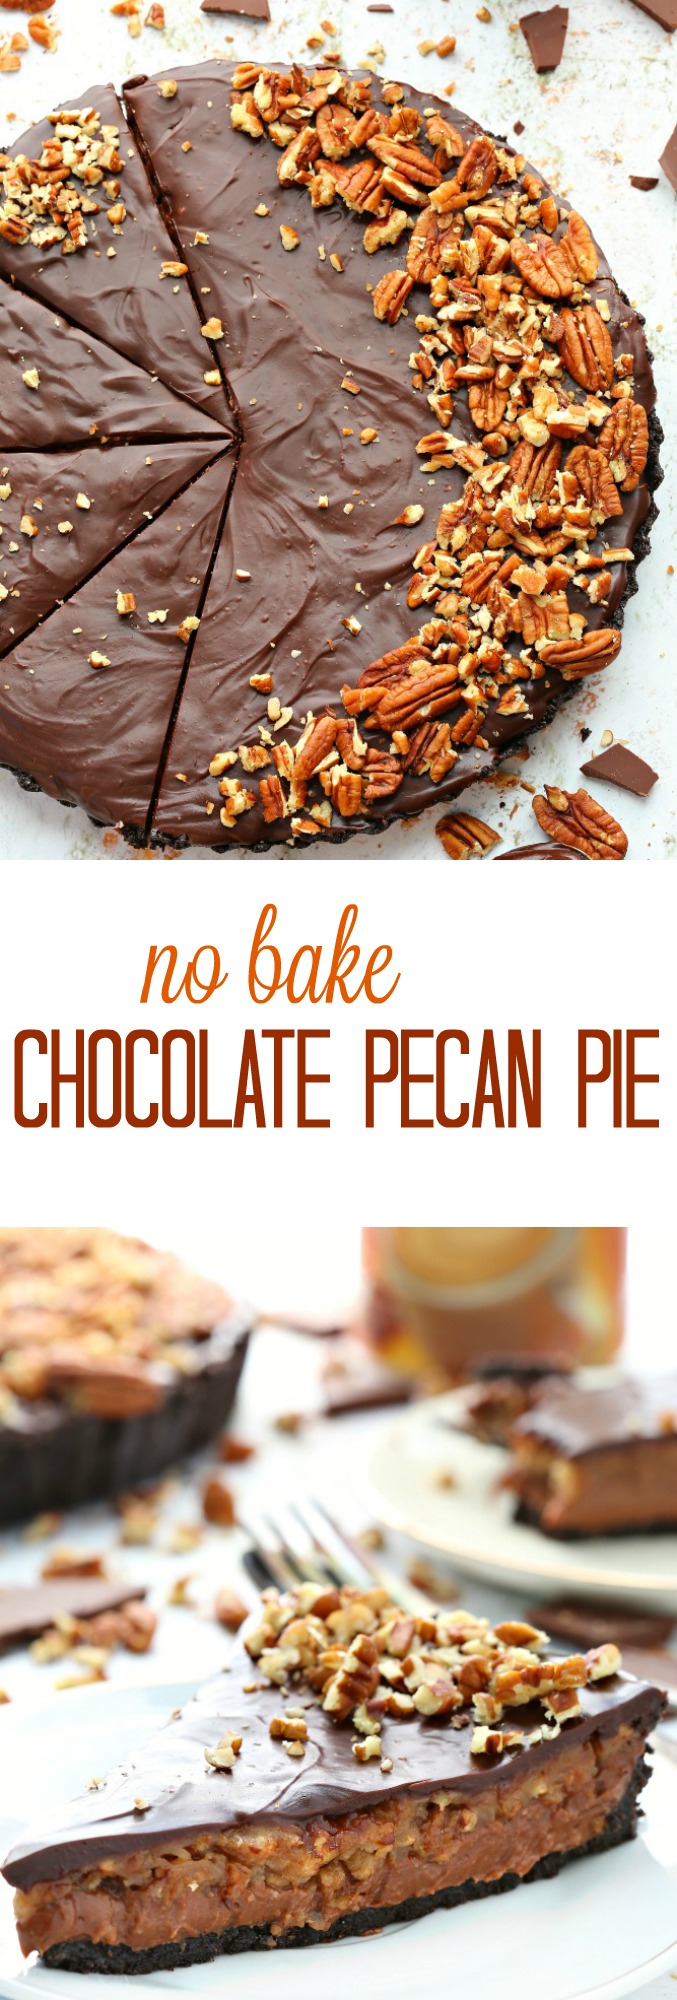 A twist on the classic Thanksgiving dessert, this no bake chocolate pecan pie features three layers of chocolate goodness and a very generous amount of pecan pie filling. Everyone will rave about it!